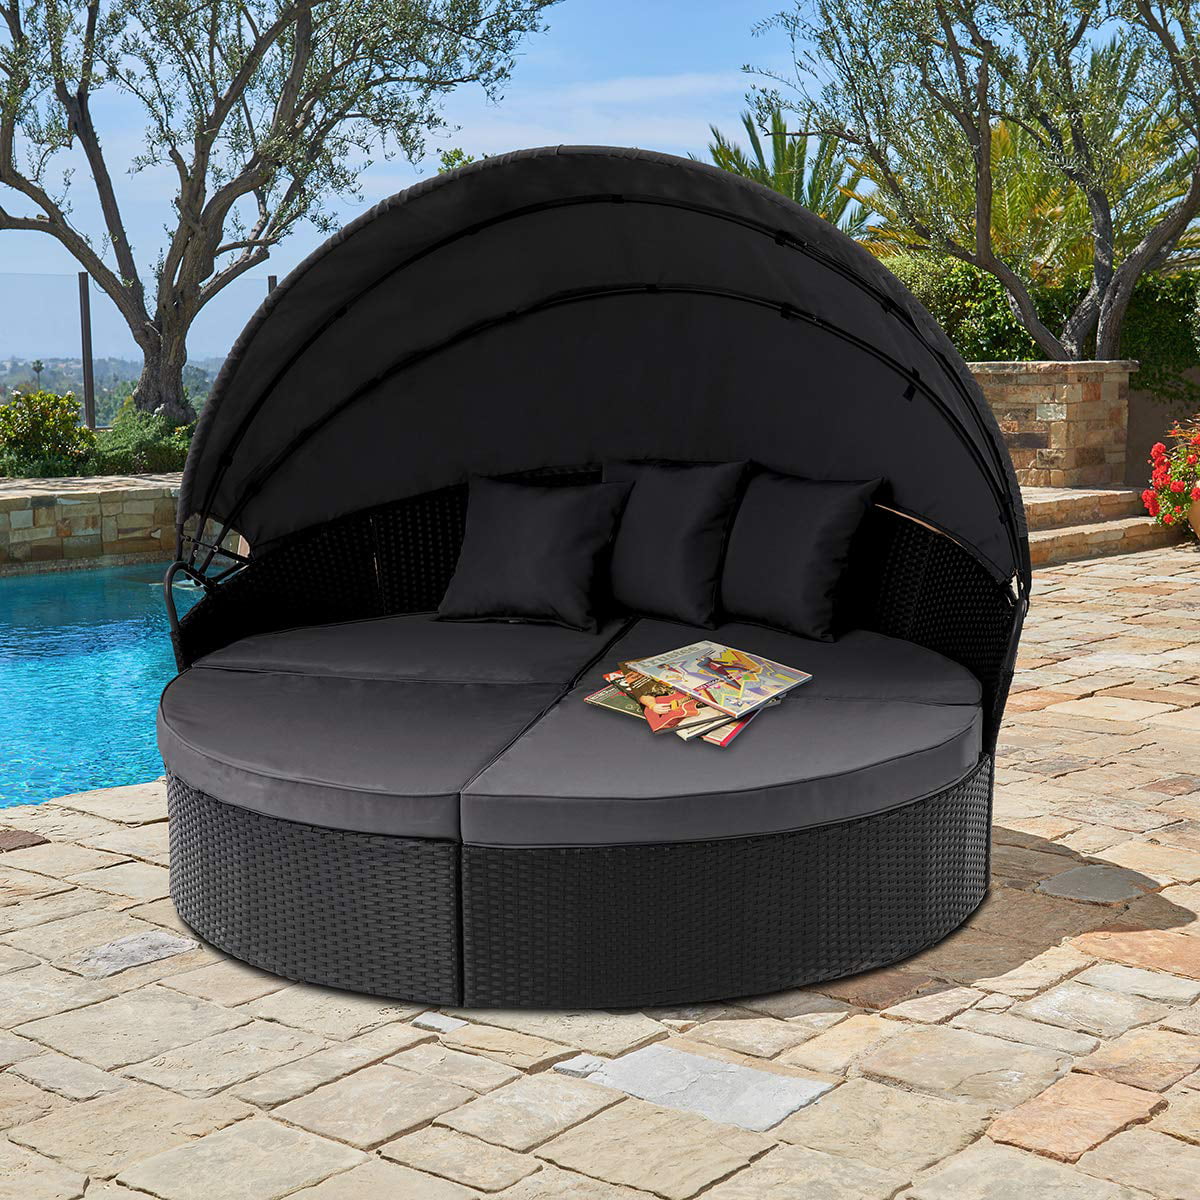 Retractable Canopy Daybed, Outdoor Daybed Patio Furniture With Cushions